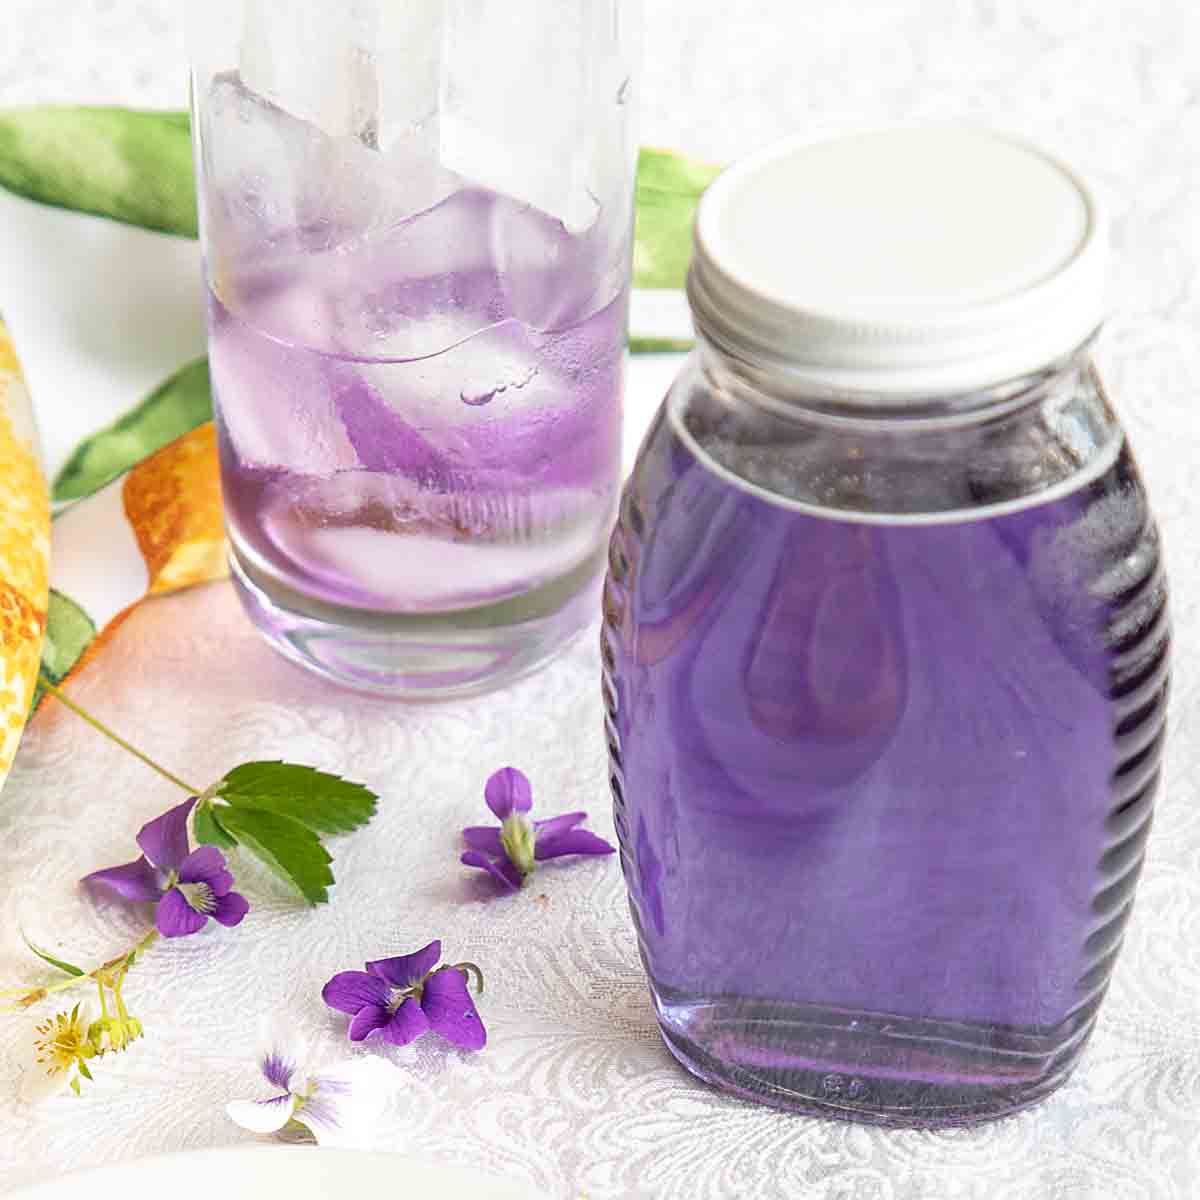 Violet syrup in har with glass